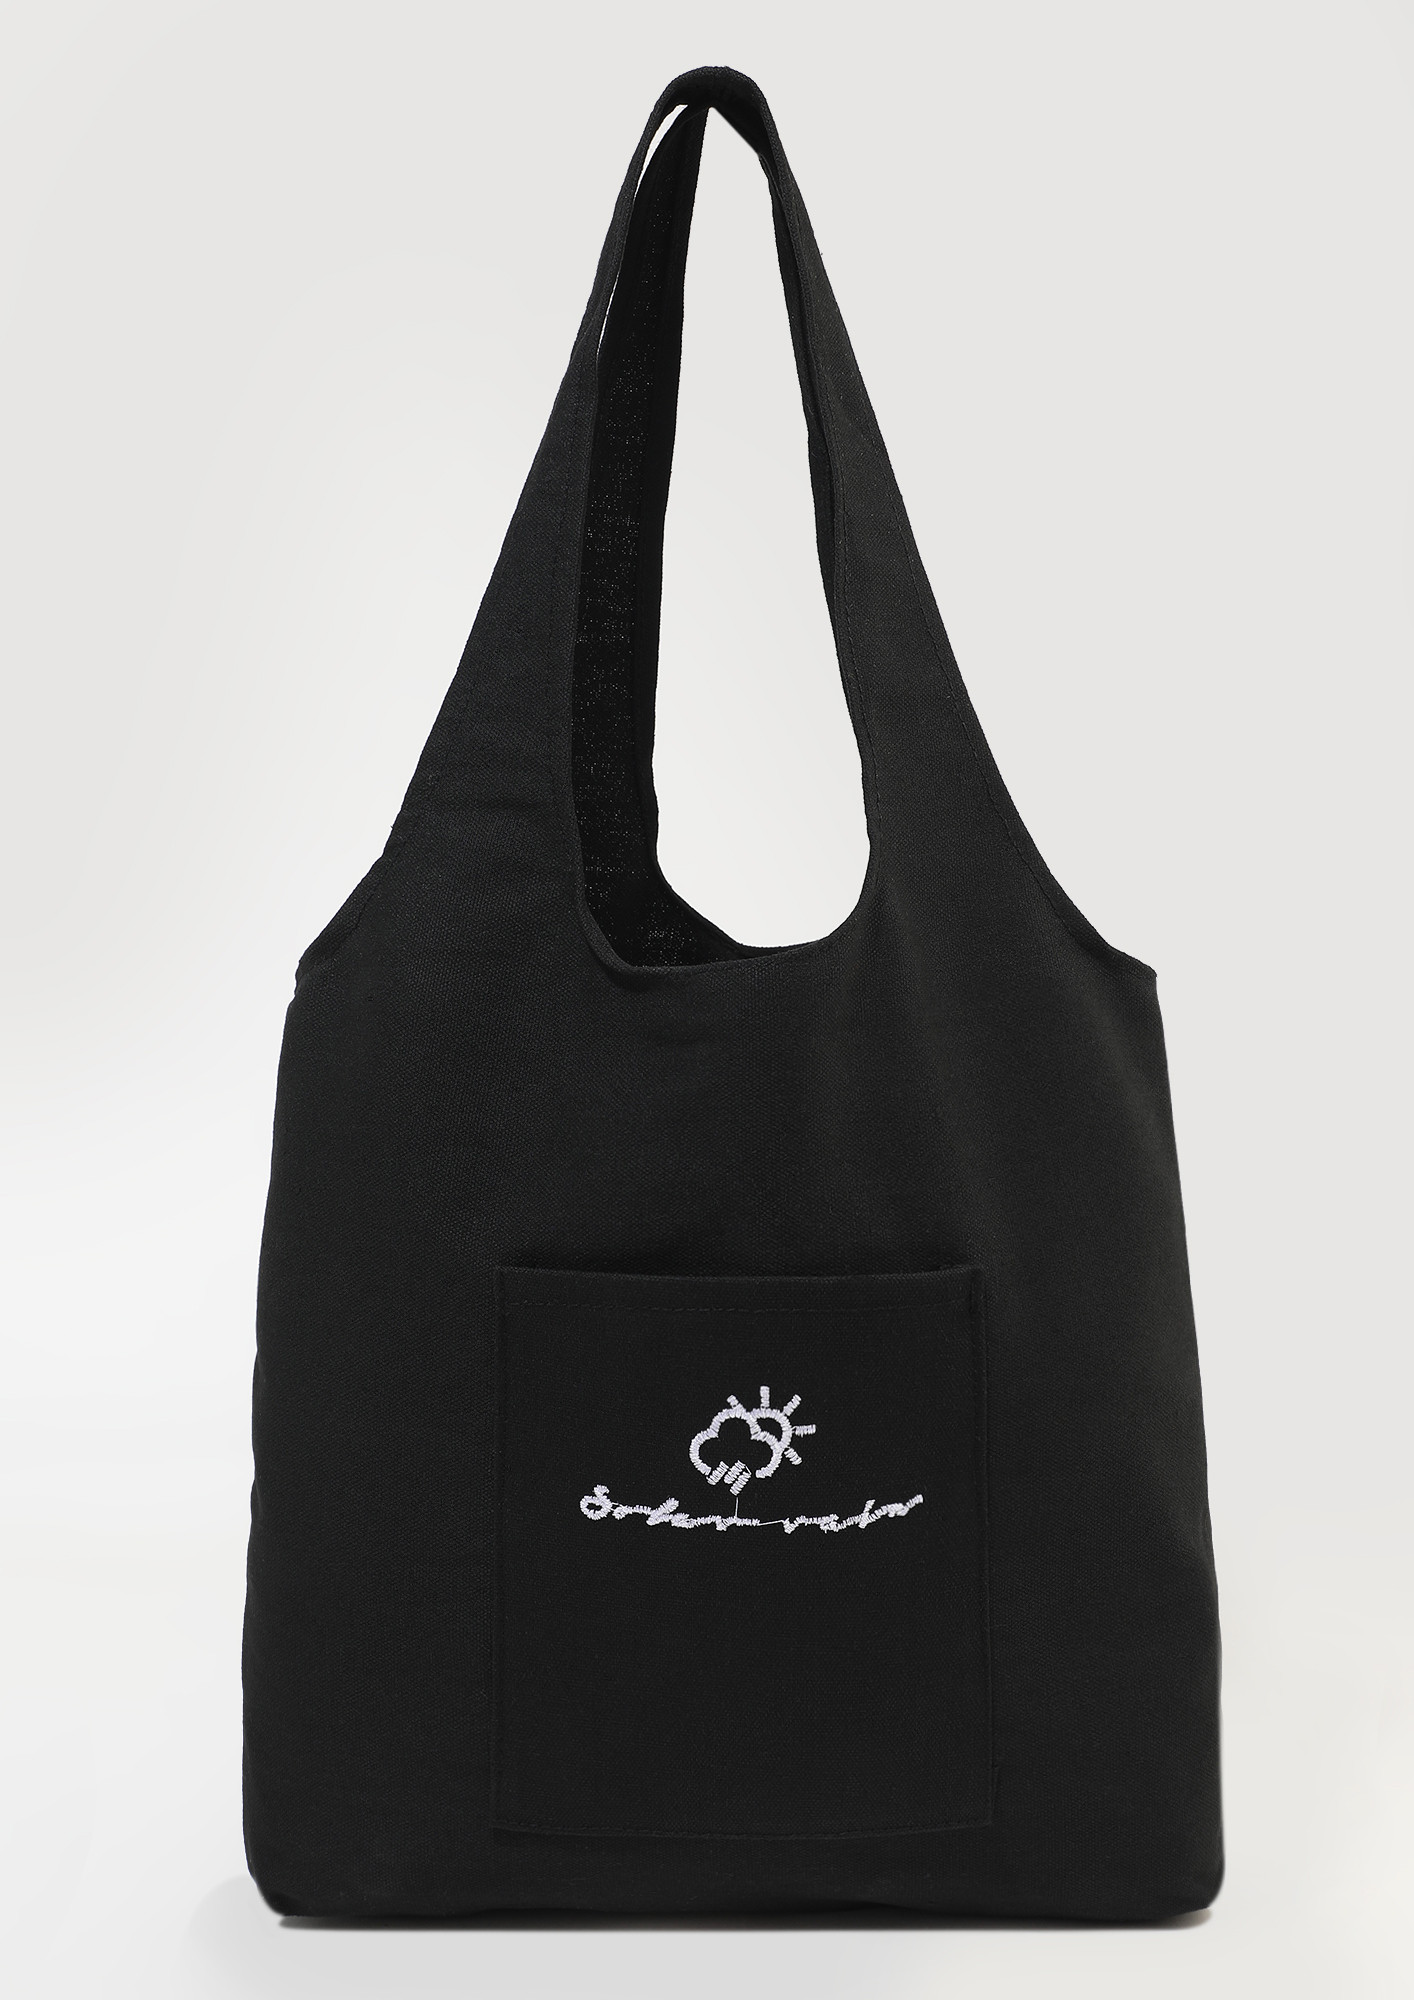 Canvas Bag - Buy College Tote Bag Online in India